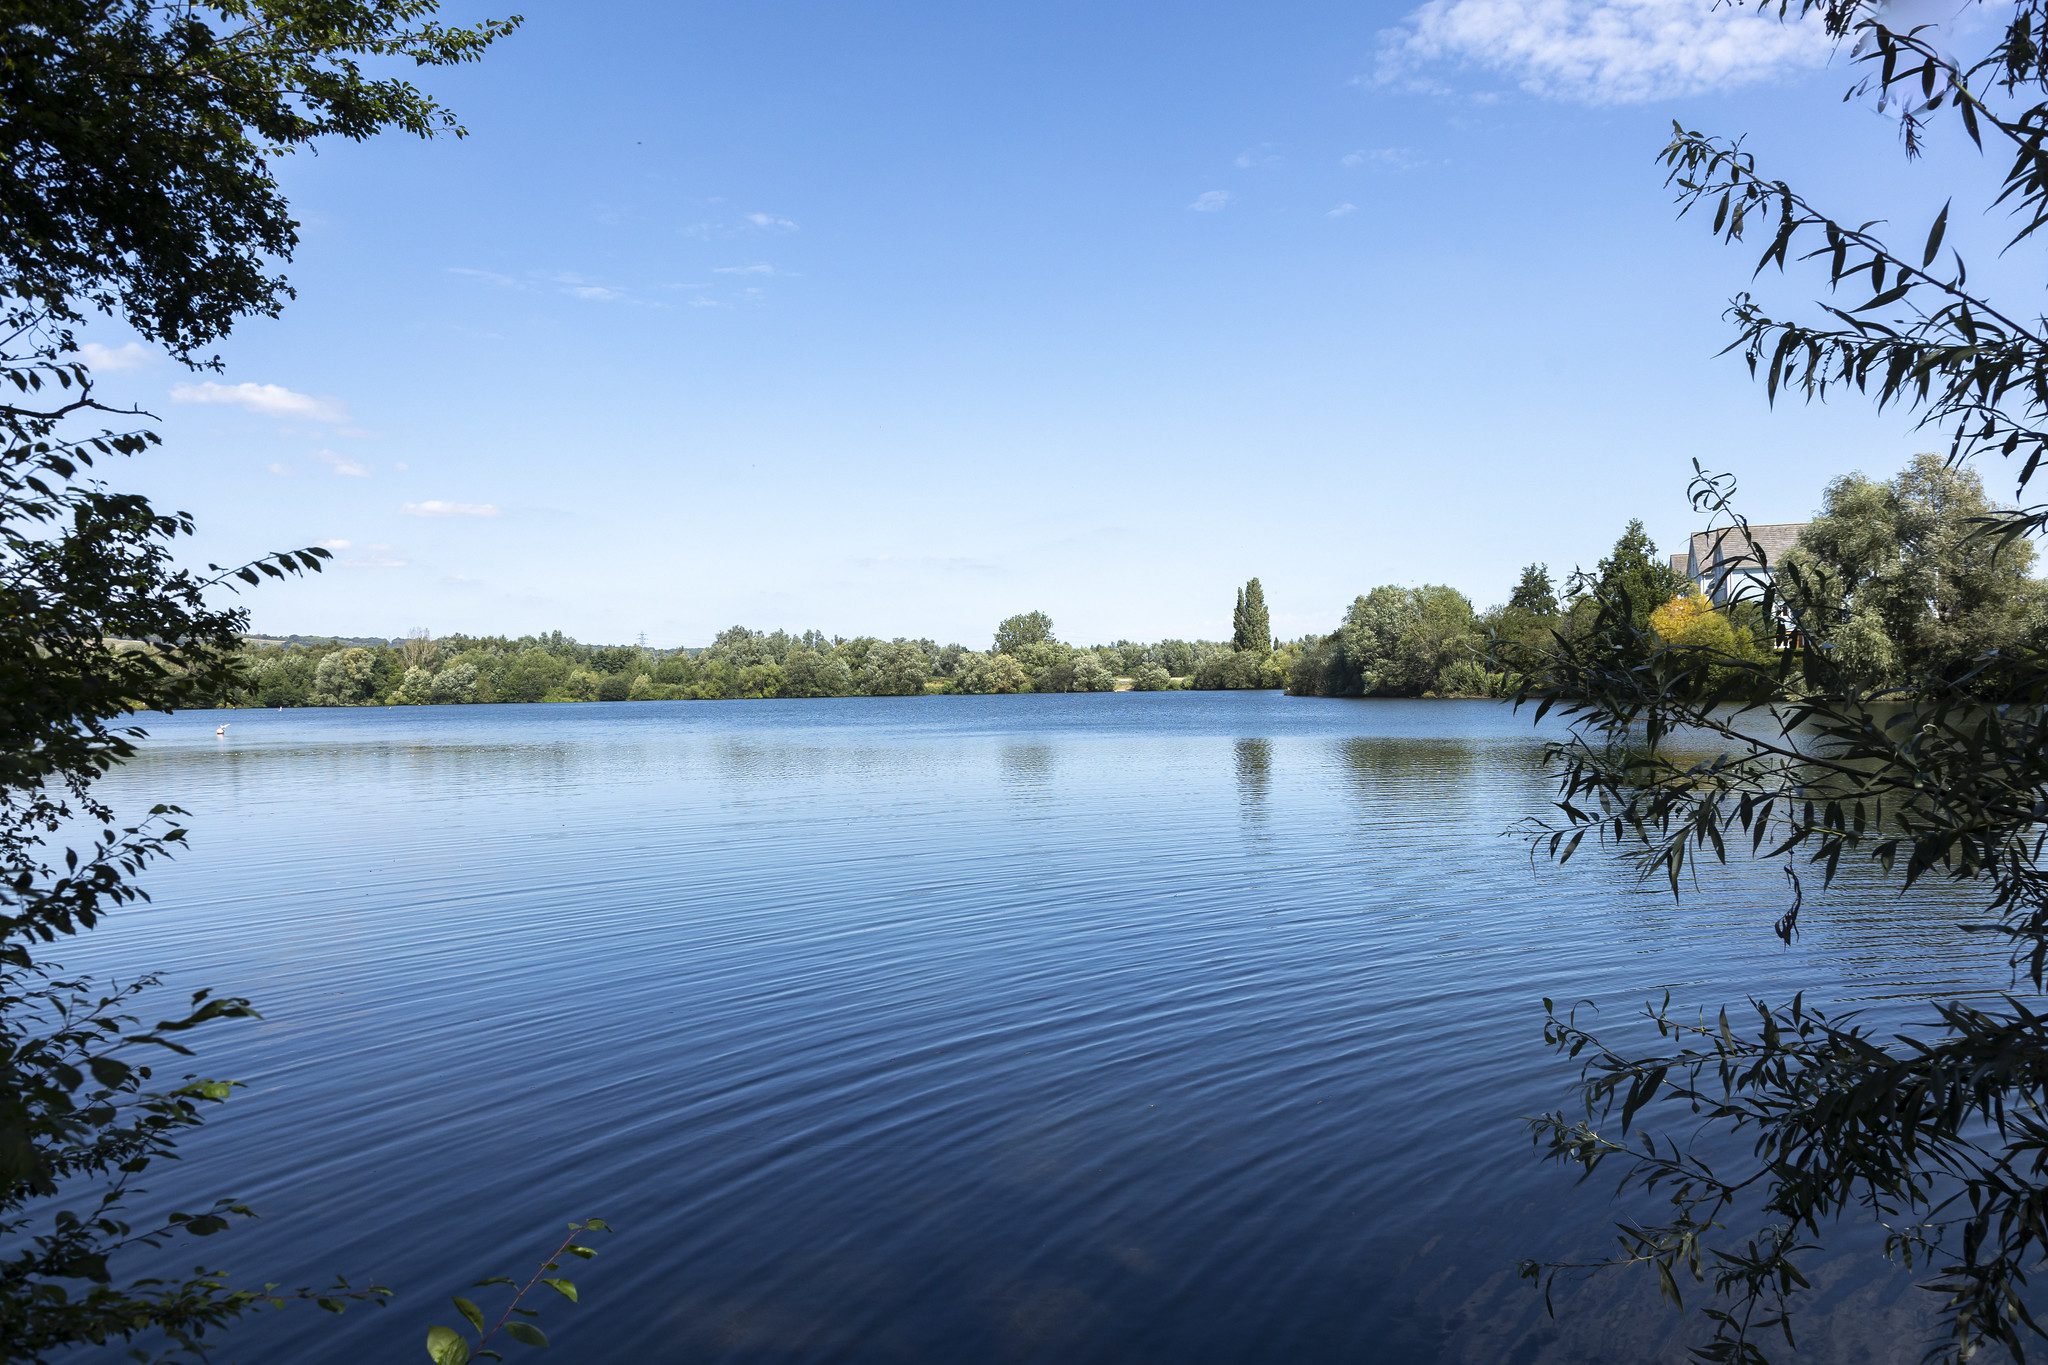 View across vivid blue waters of Leybourne Lakes